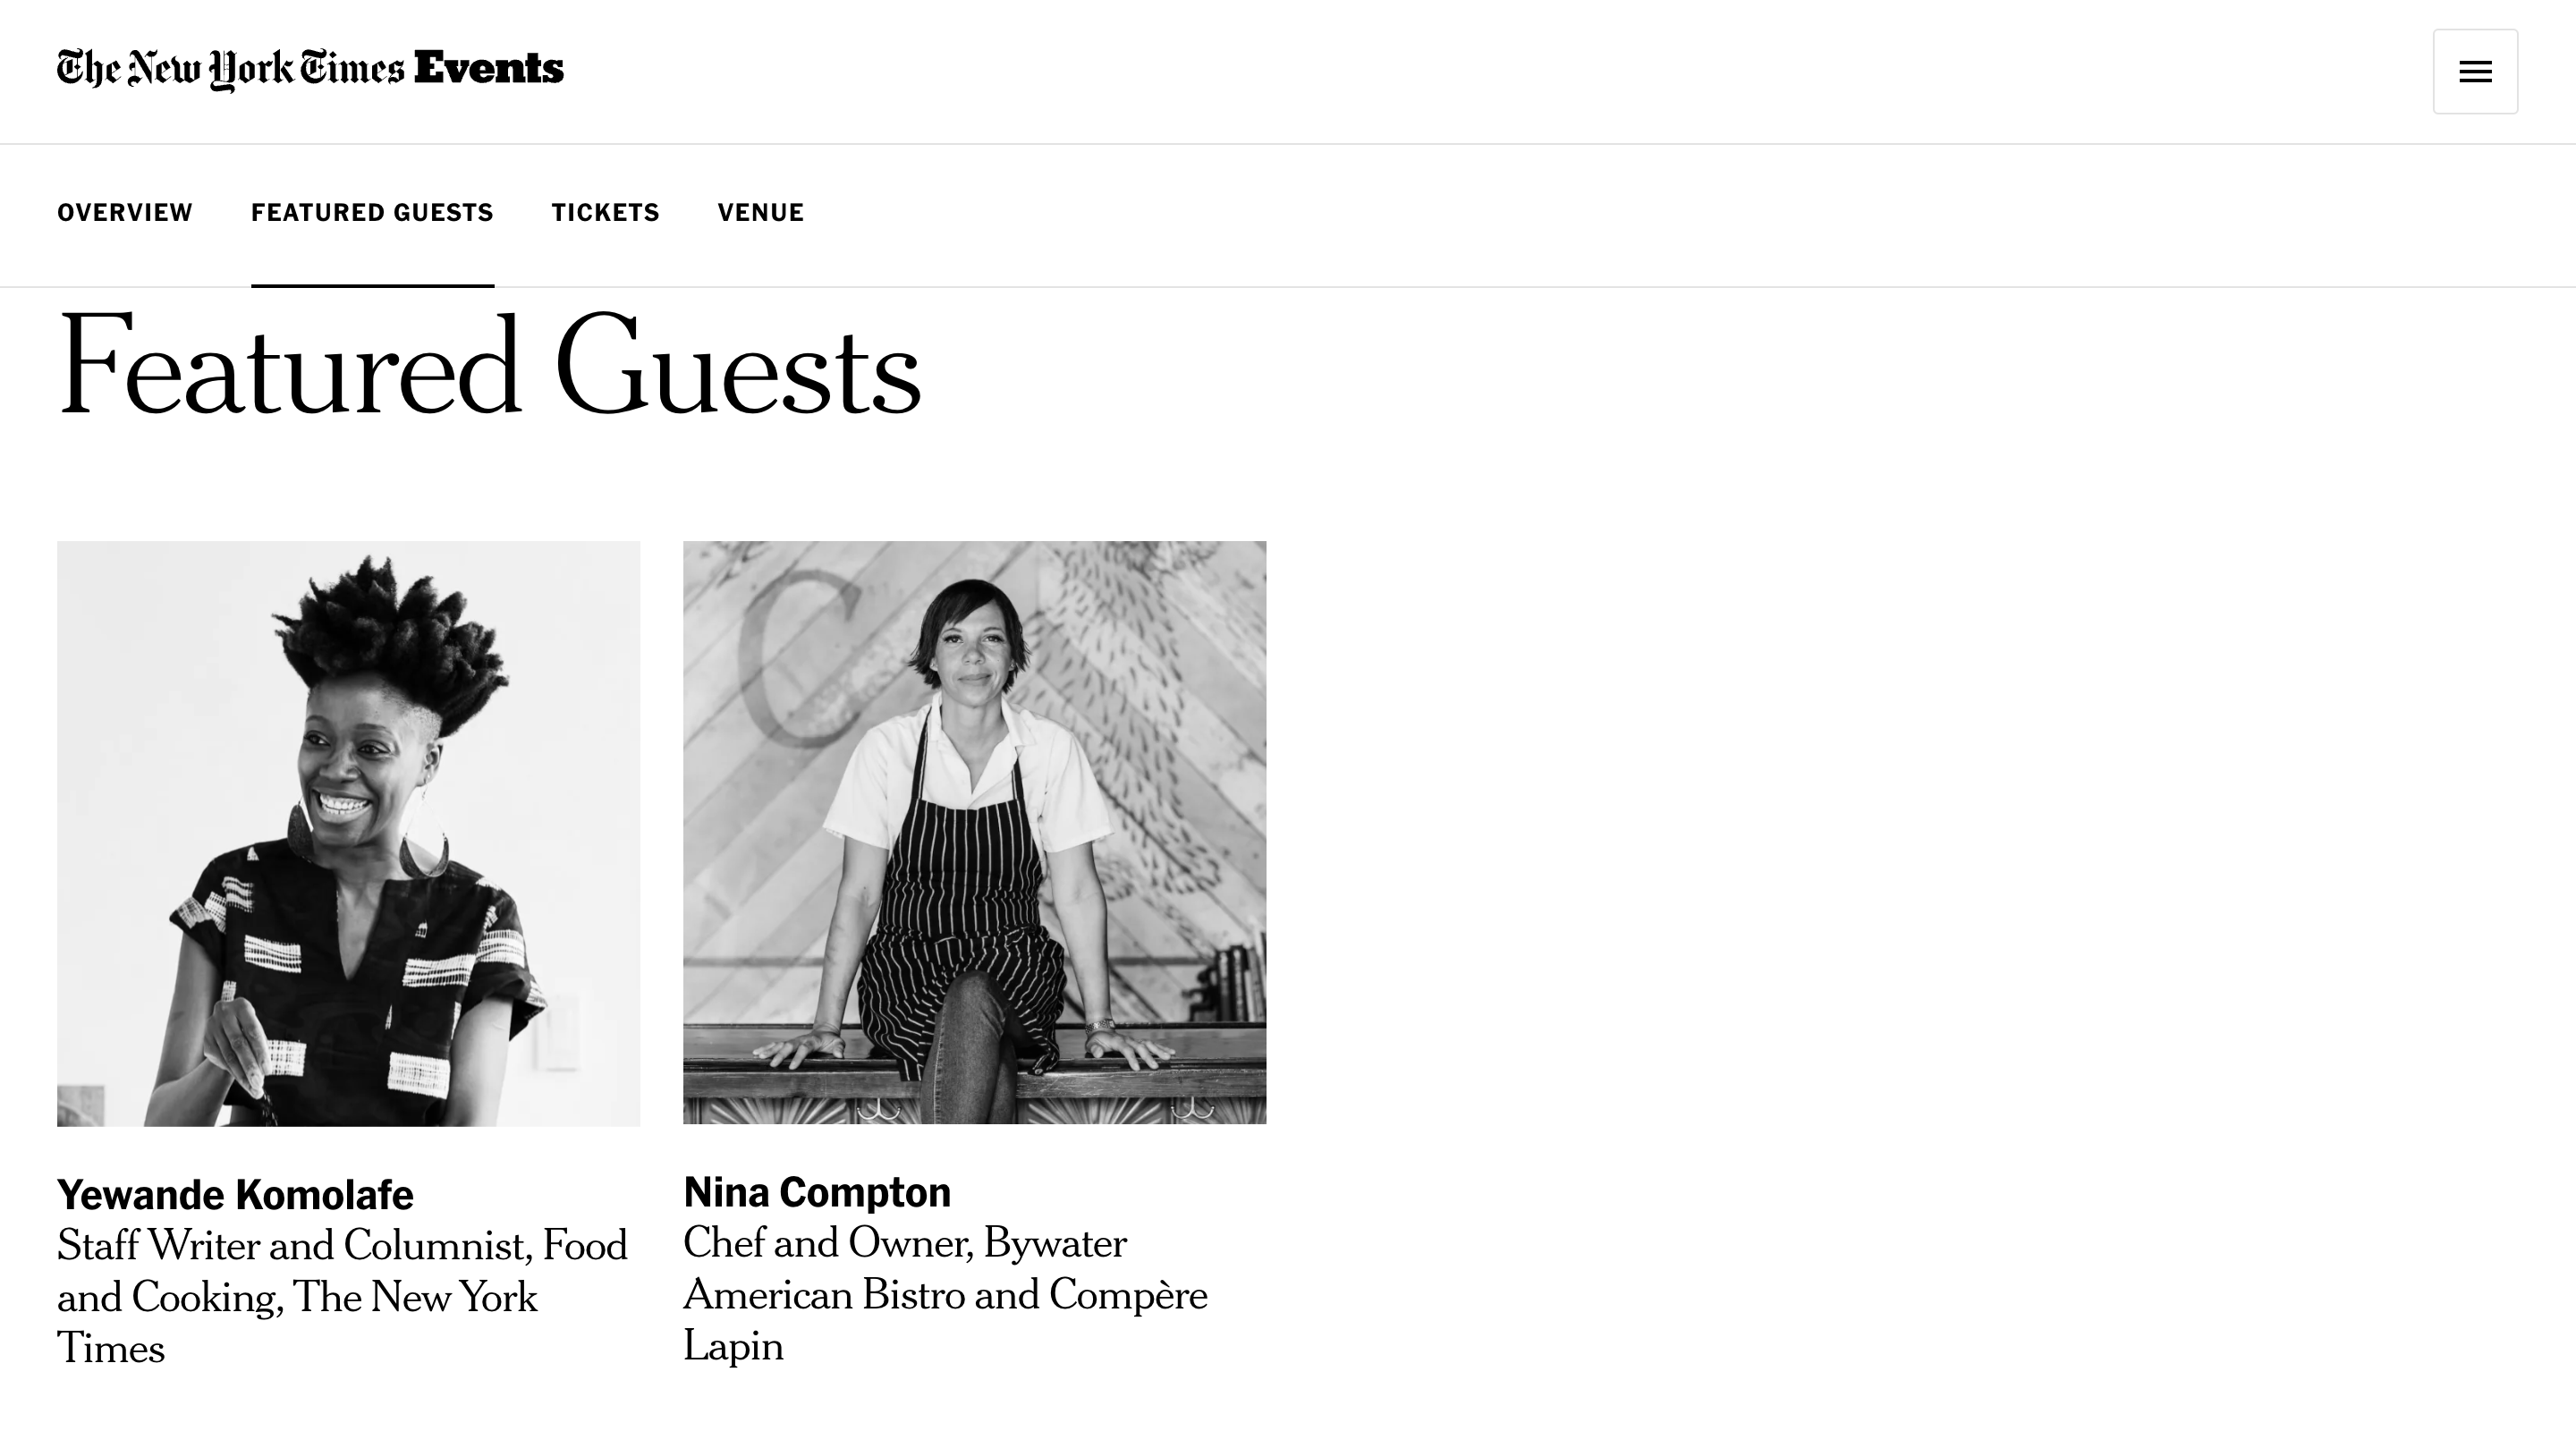 Screenshot of the “Featured Guests” section on a single event page. The page has its own top navigation for navigating sections. The “Featured Guests” element in the navbar is underlined in the screenshot.